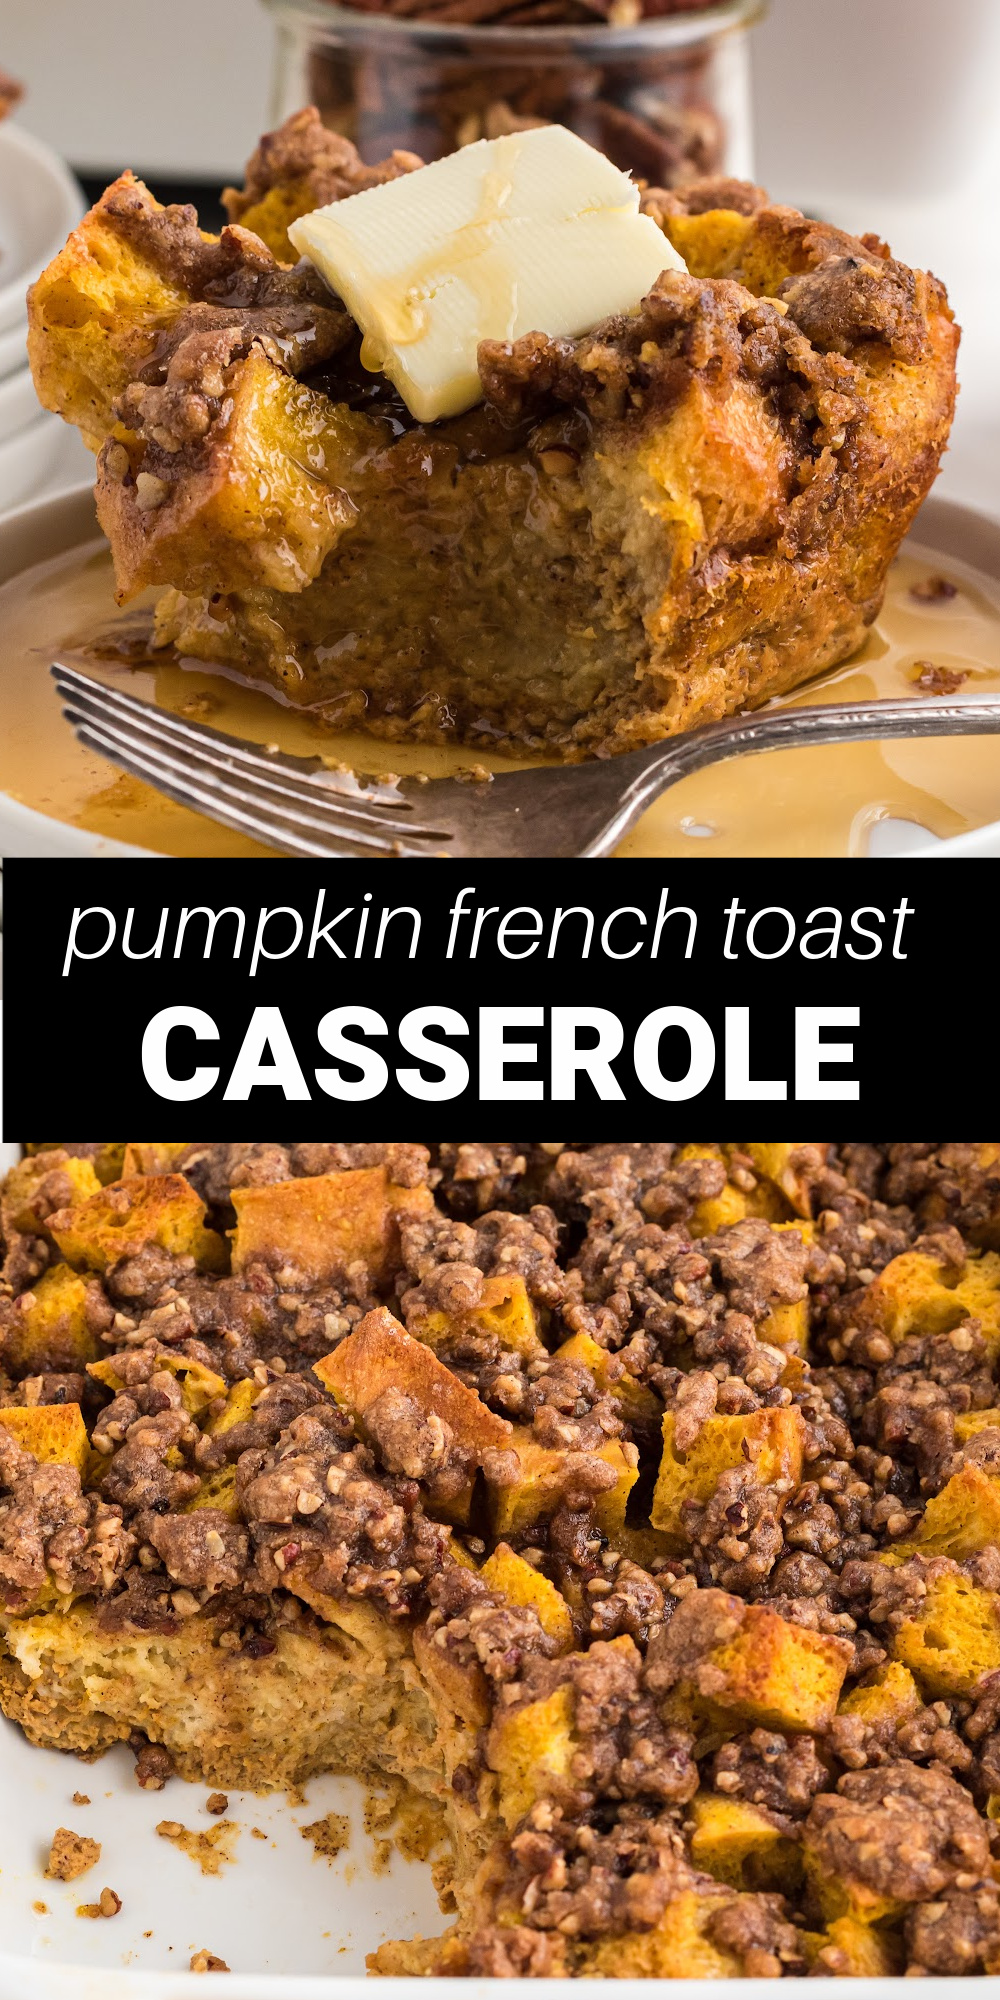 Pumpkin French Toast Casserole is delicious twist on the classic breakfast dish that's perfect for fall. French bread is immersed in heavy cream, brown sugar, pumpkin puree and warm pumpkin pie spices, then topped a sugary pecan mixture that's makes a breakfast dish worthy of any holiday.